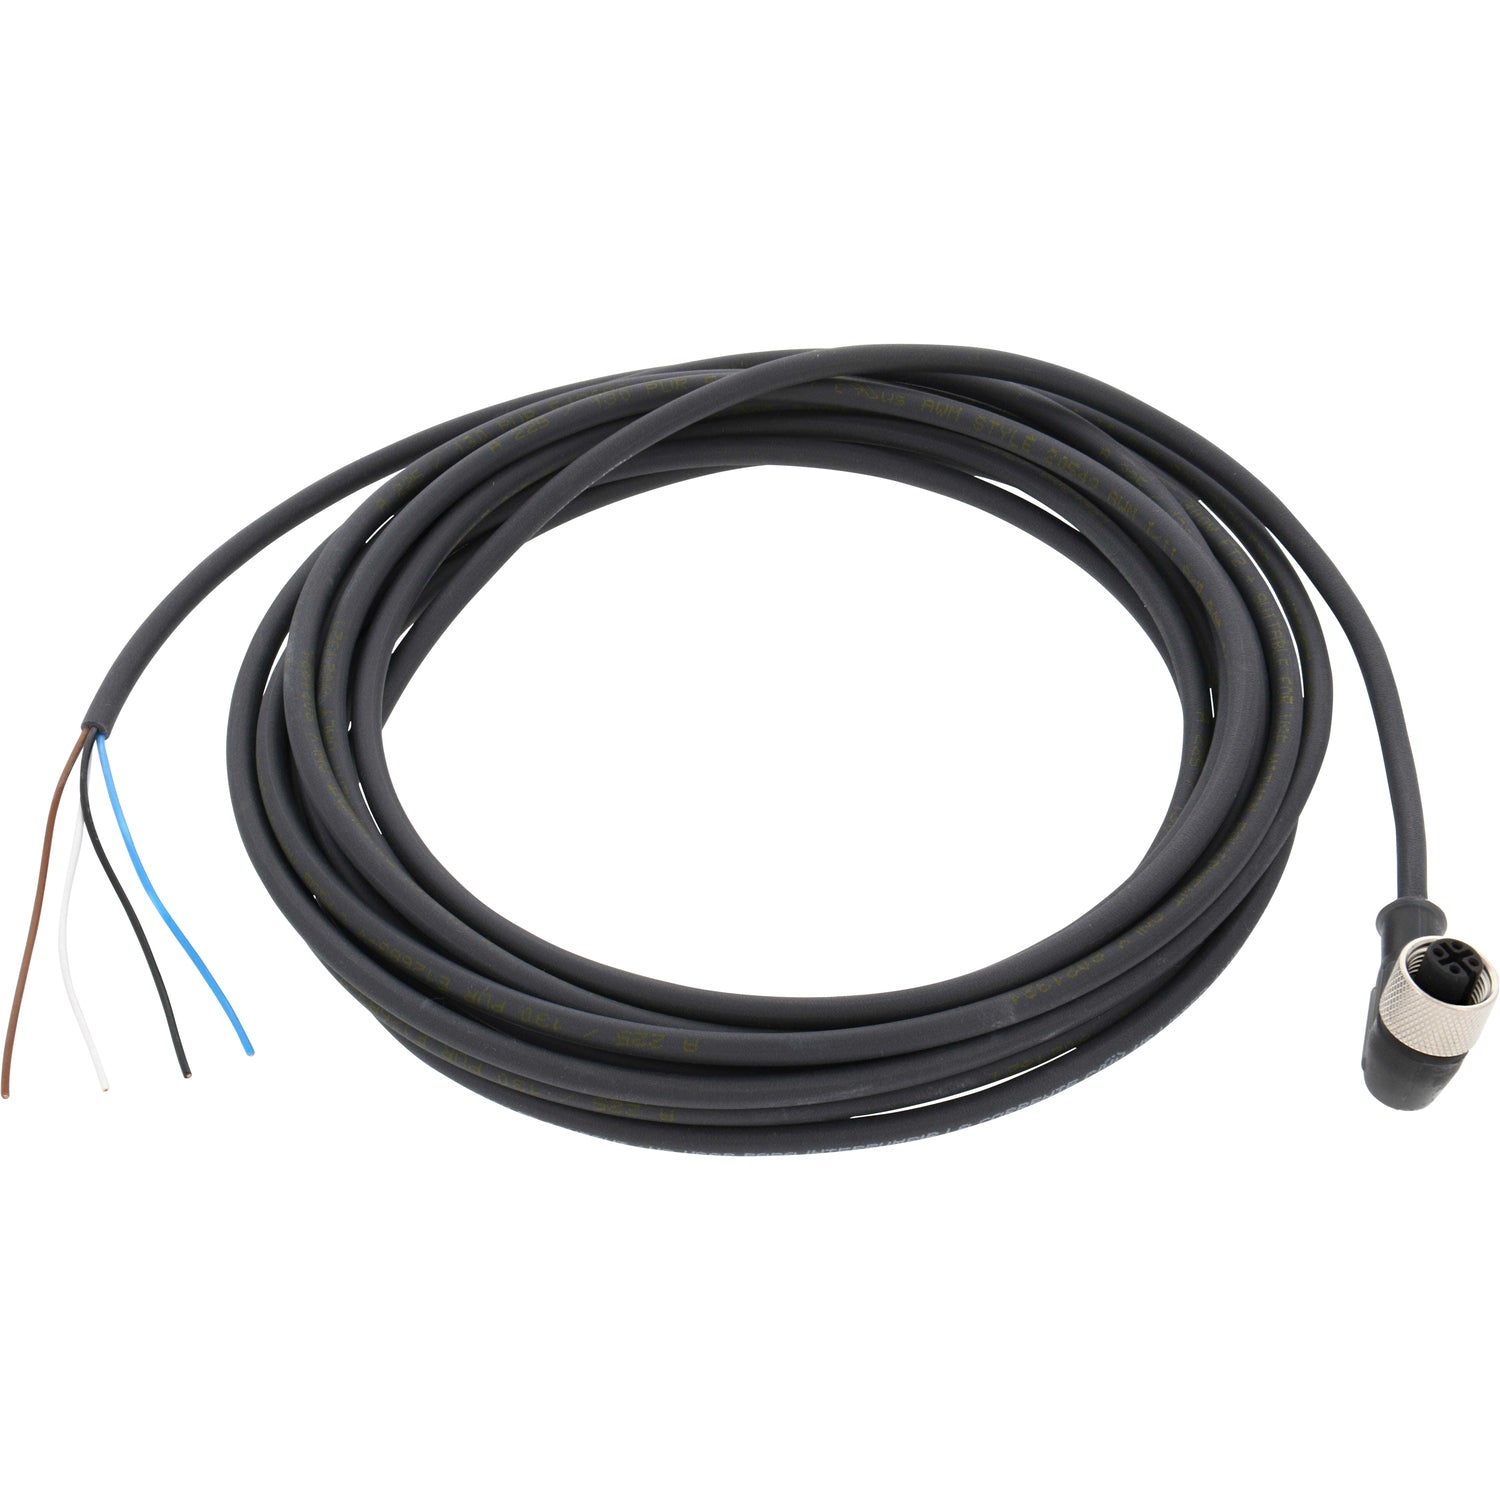 Black, coiled connecting cable with black 90 degree plug on one end and exposed blue, brown, white, and black wires on other end. Sensor cable is shown on a white back ground. XZCP1241L5